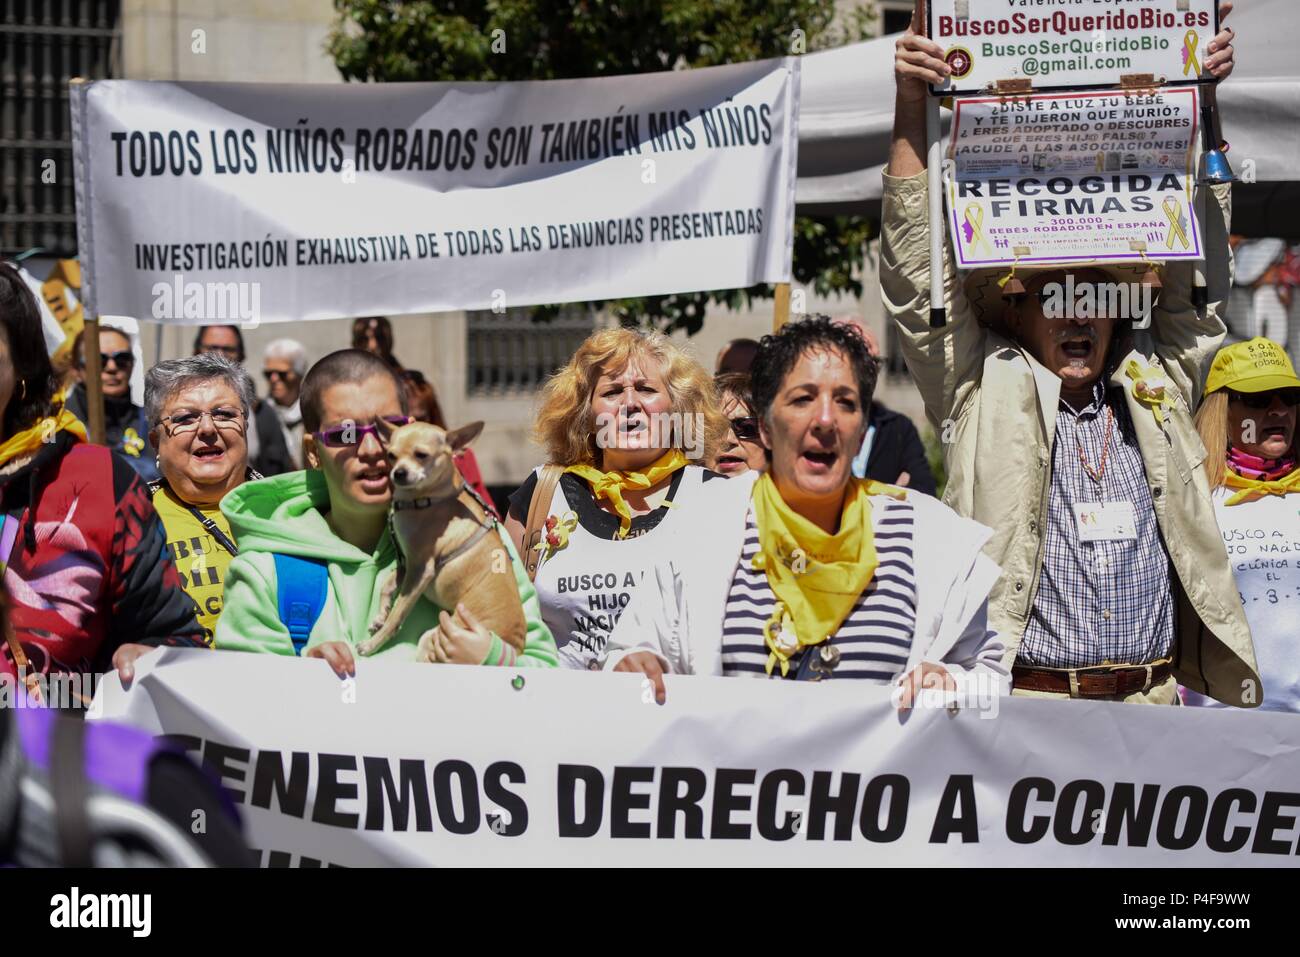 May 1, 2016 - Madrid, Spain: Victims of a baby-stealing policy hold a demonstration in central Madrid to ask Spanish authorities to fully investigate the alleged theft of thousands of newborns. The scandal of the 'bebes robados' ('stolen babies') date back from the era of Spanish dictator Francisco Franco, during which the newborns of some communist opponents of the regime or unmarried couples were declared stillborn, removed from their mothers and adopted by supporters of the regime. Similar thefts and illegal adoptions continued until the 1980s and 1990s and it's now estimated that as many a Stock Photo